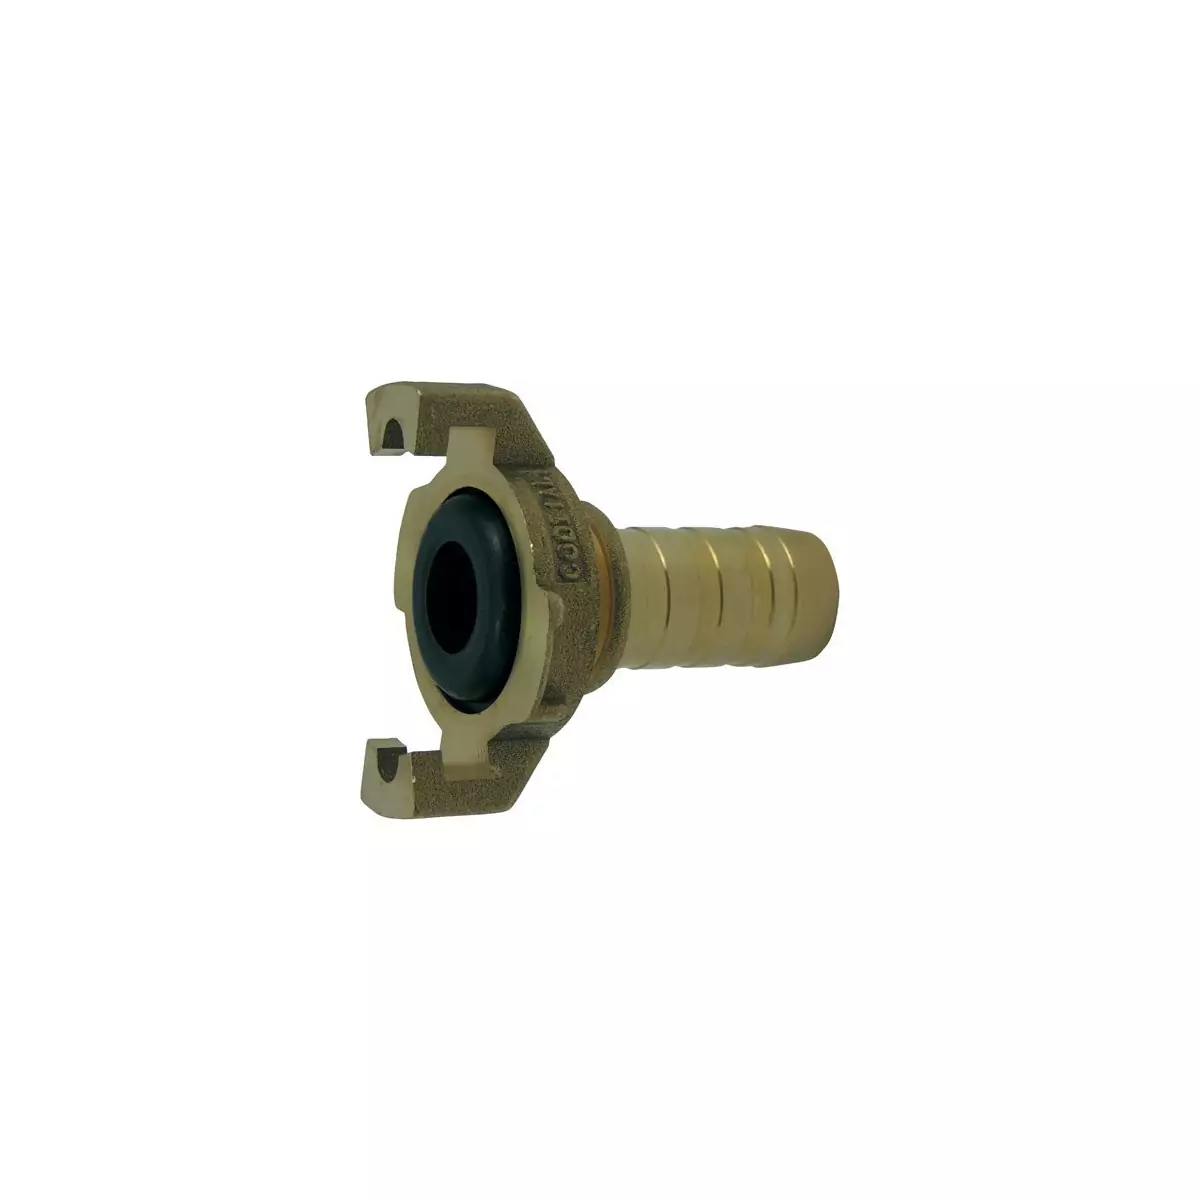 Express coupling with machined fluted shank with collar and seal